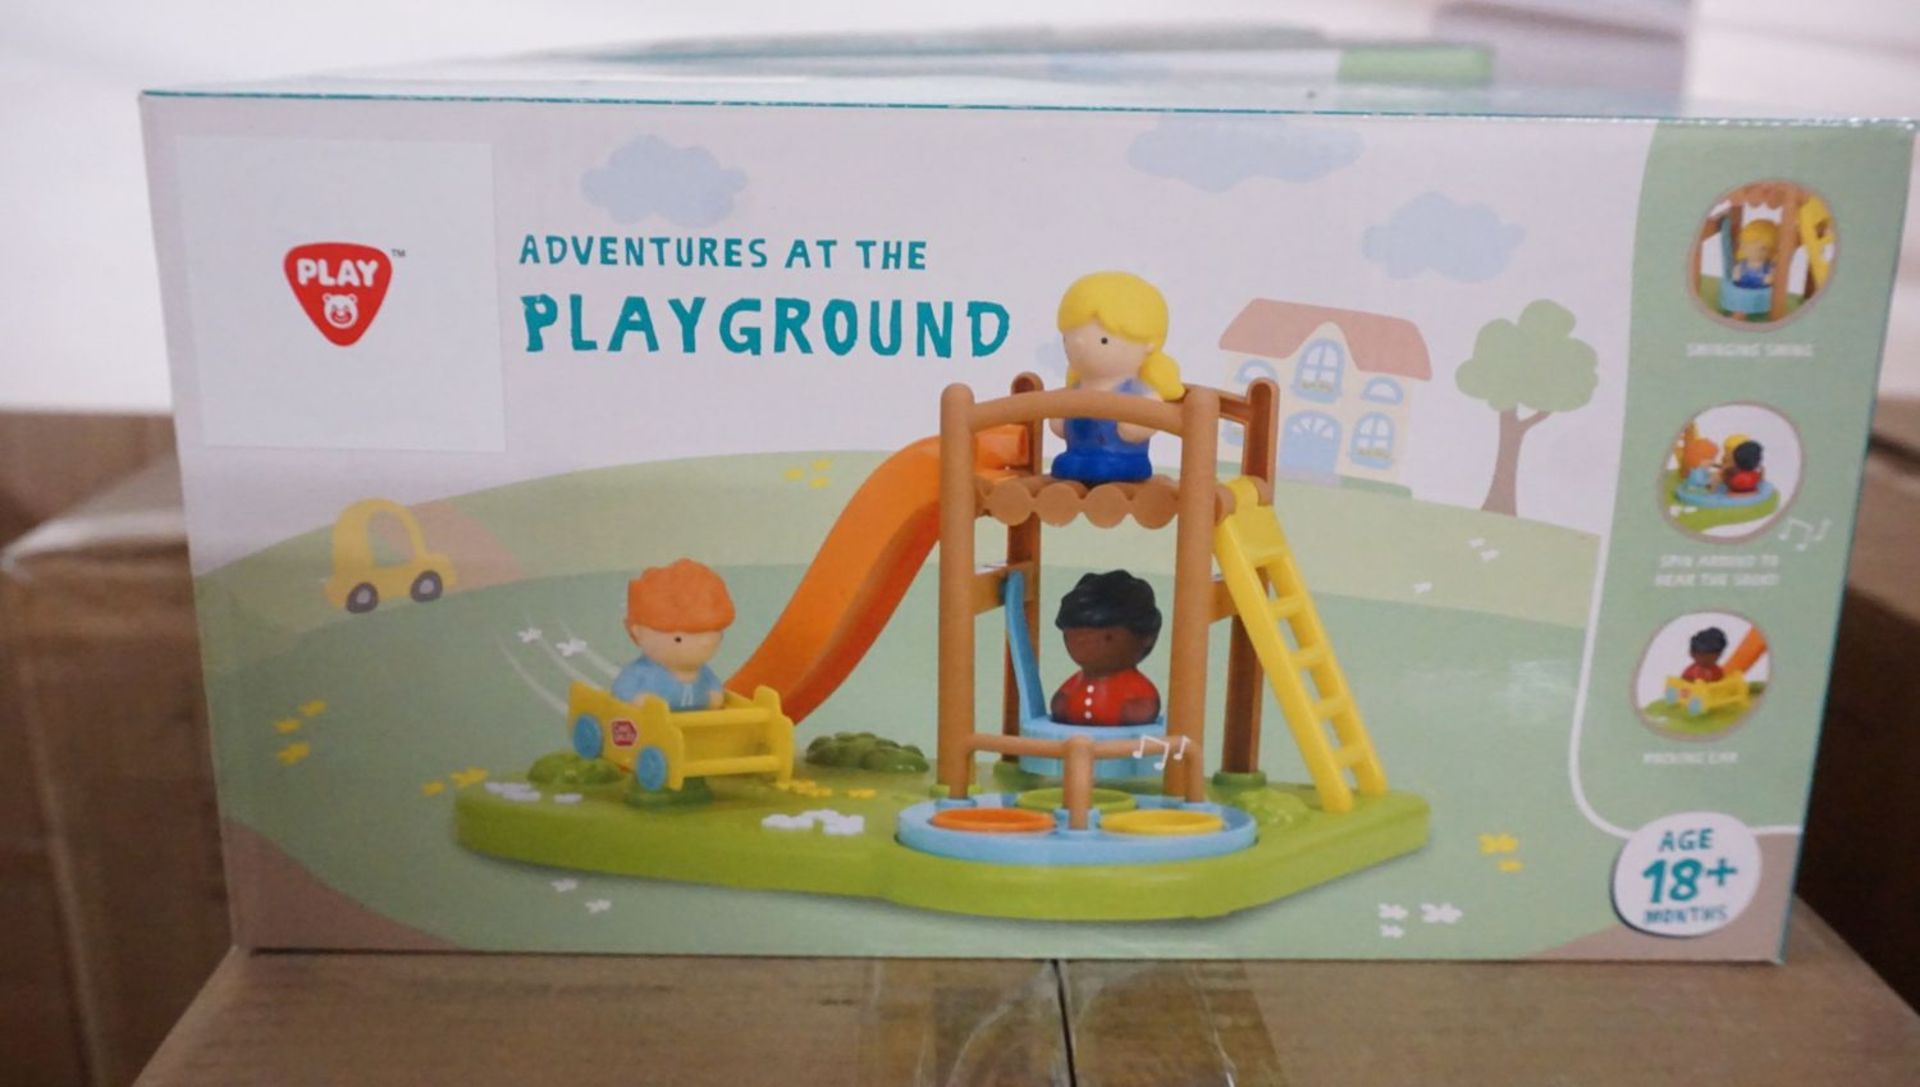 LOT - PLAY ADVENTURES AT THE PLAYGROUND (11 BOXES - 4 PCS/BOX) & LIGHTS & SOUNDS TOOL BENCH (7 BOXES - Image 2 of 3